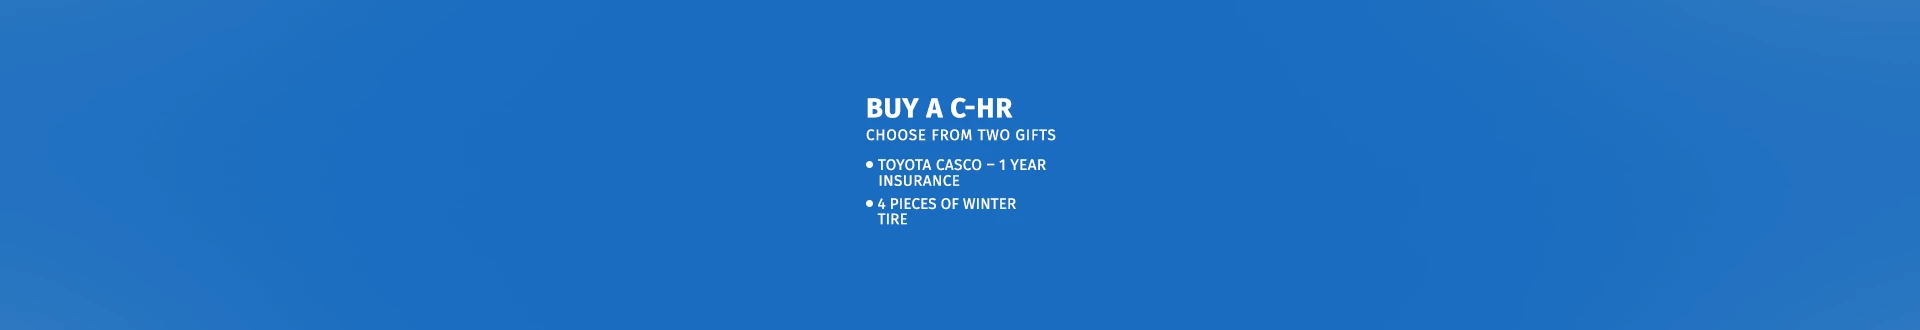 Offer Cover Image Offer for C-HR buyers